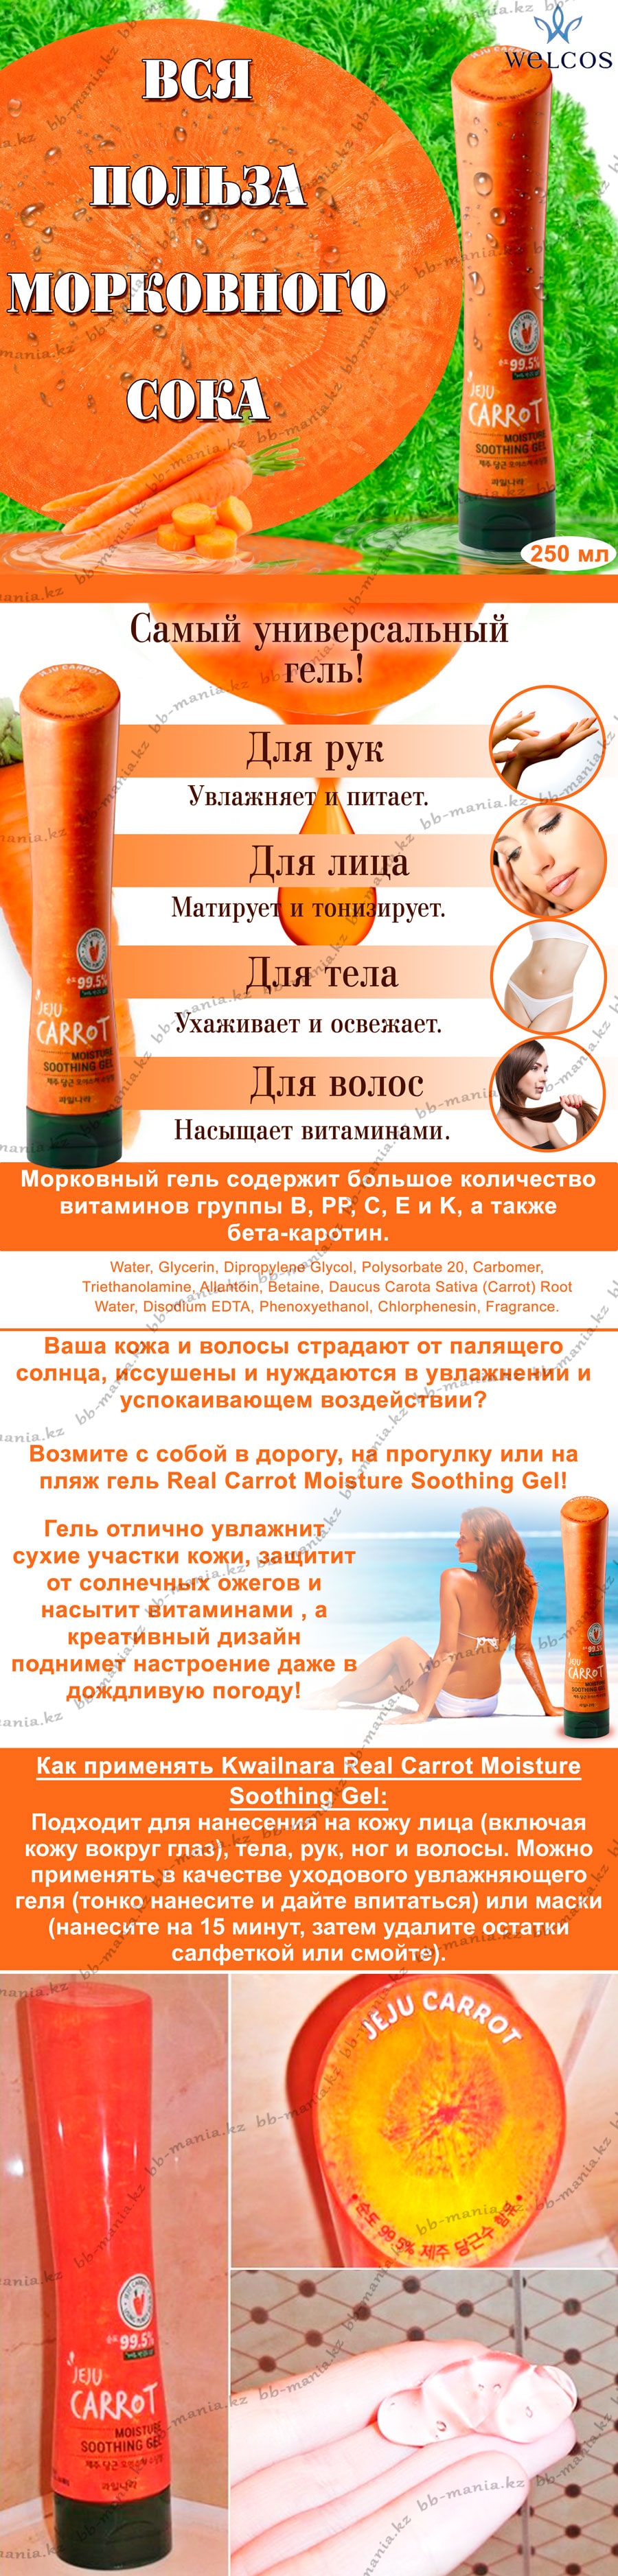 Real-Carrot-Moisture-Soothing-Gel-[Welcos]-min